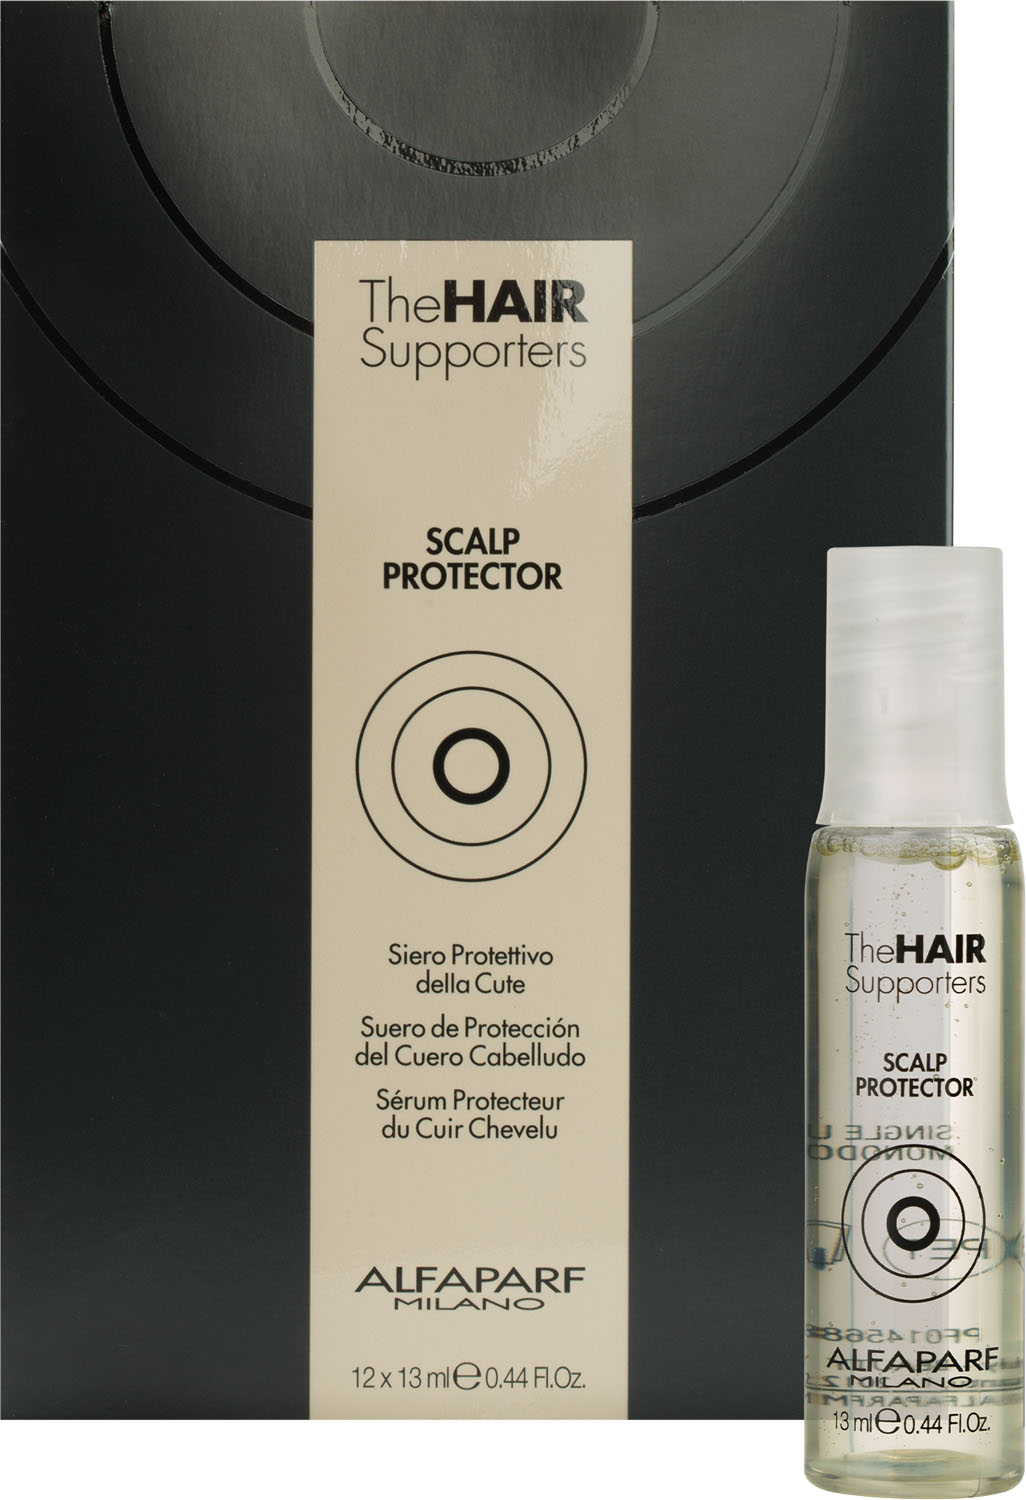  Alfaparf Milano The Hair Supporters Scalp Protector-Step 1 